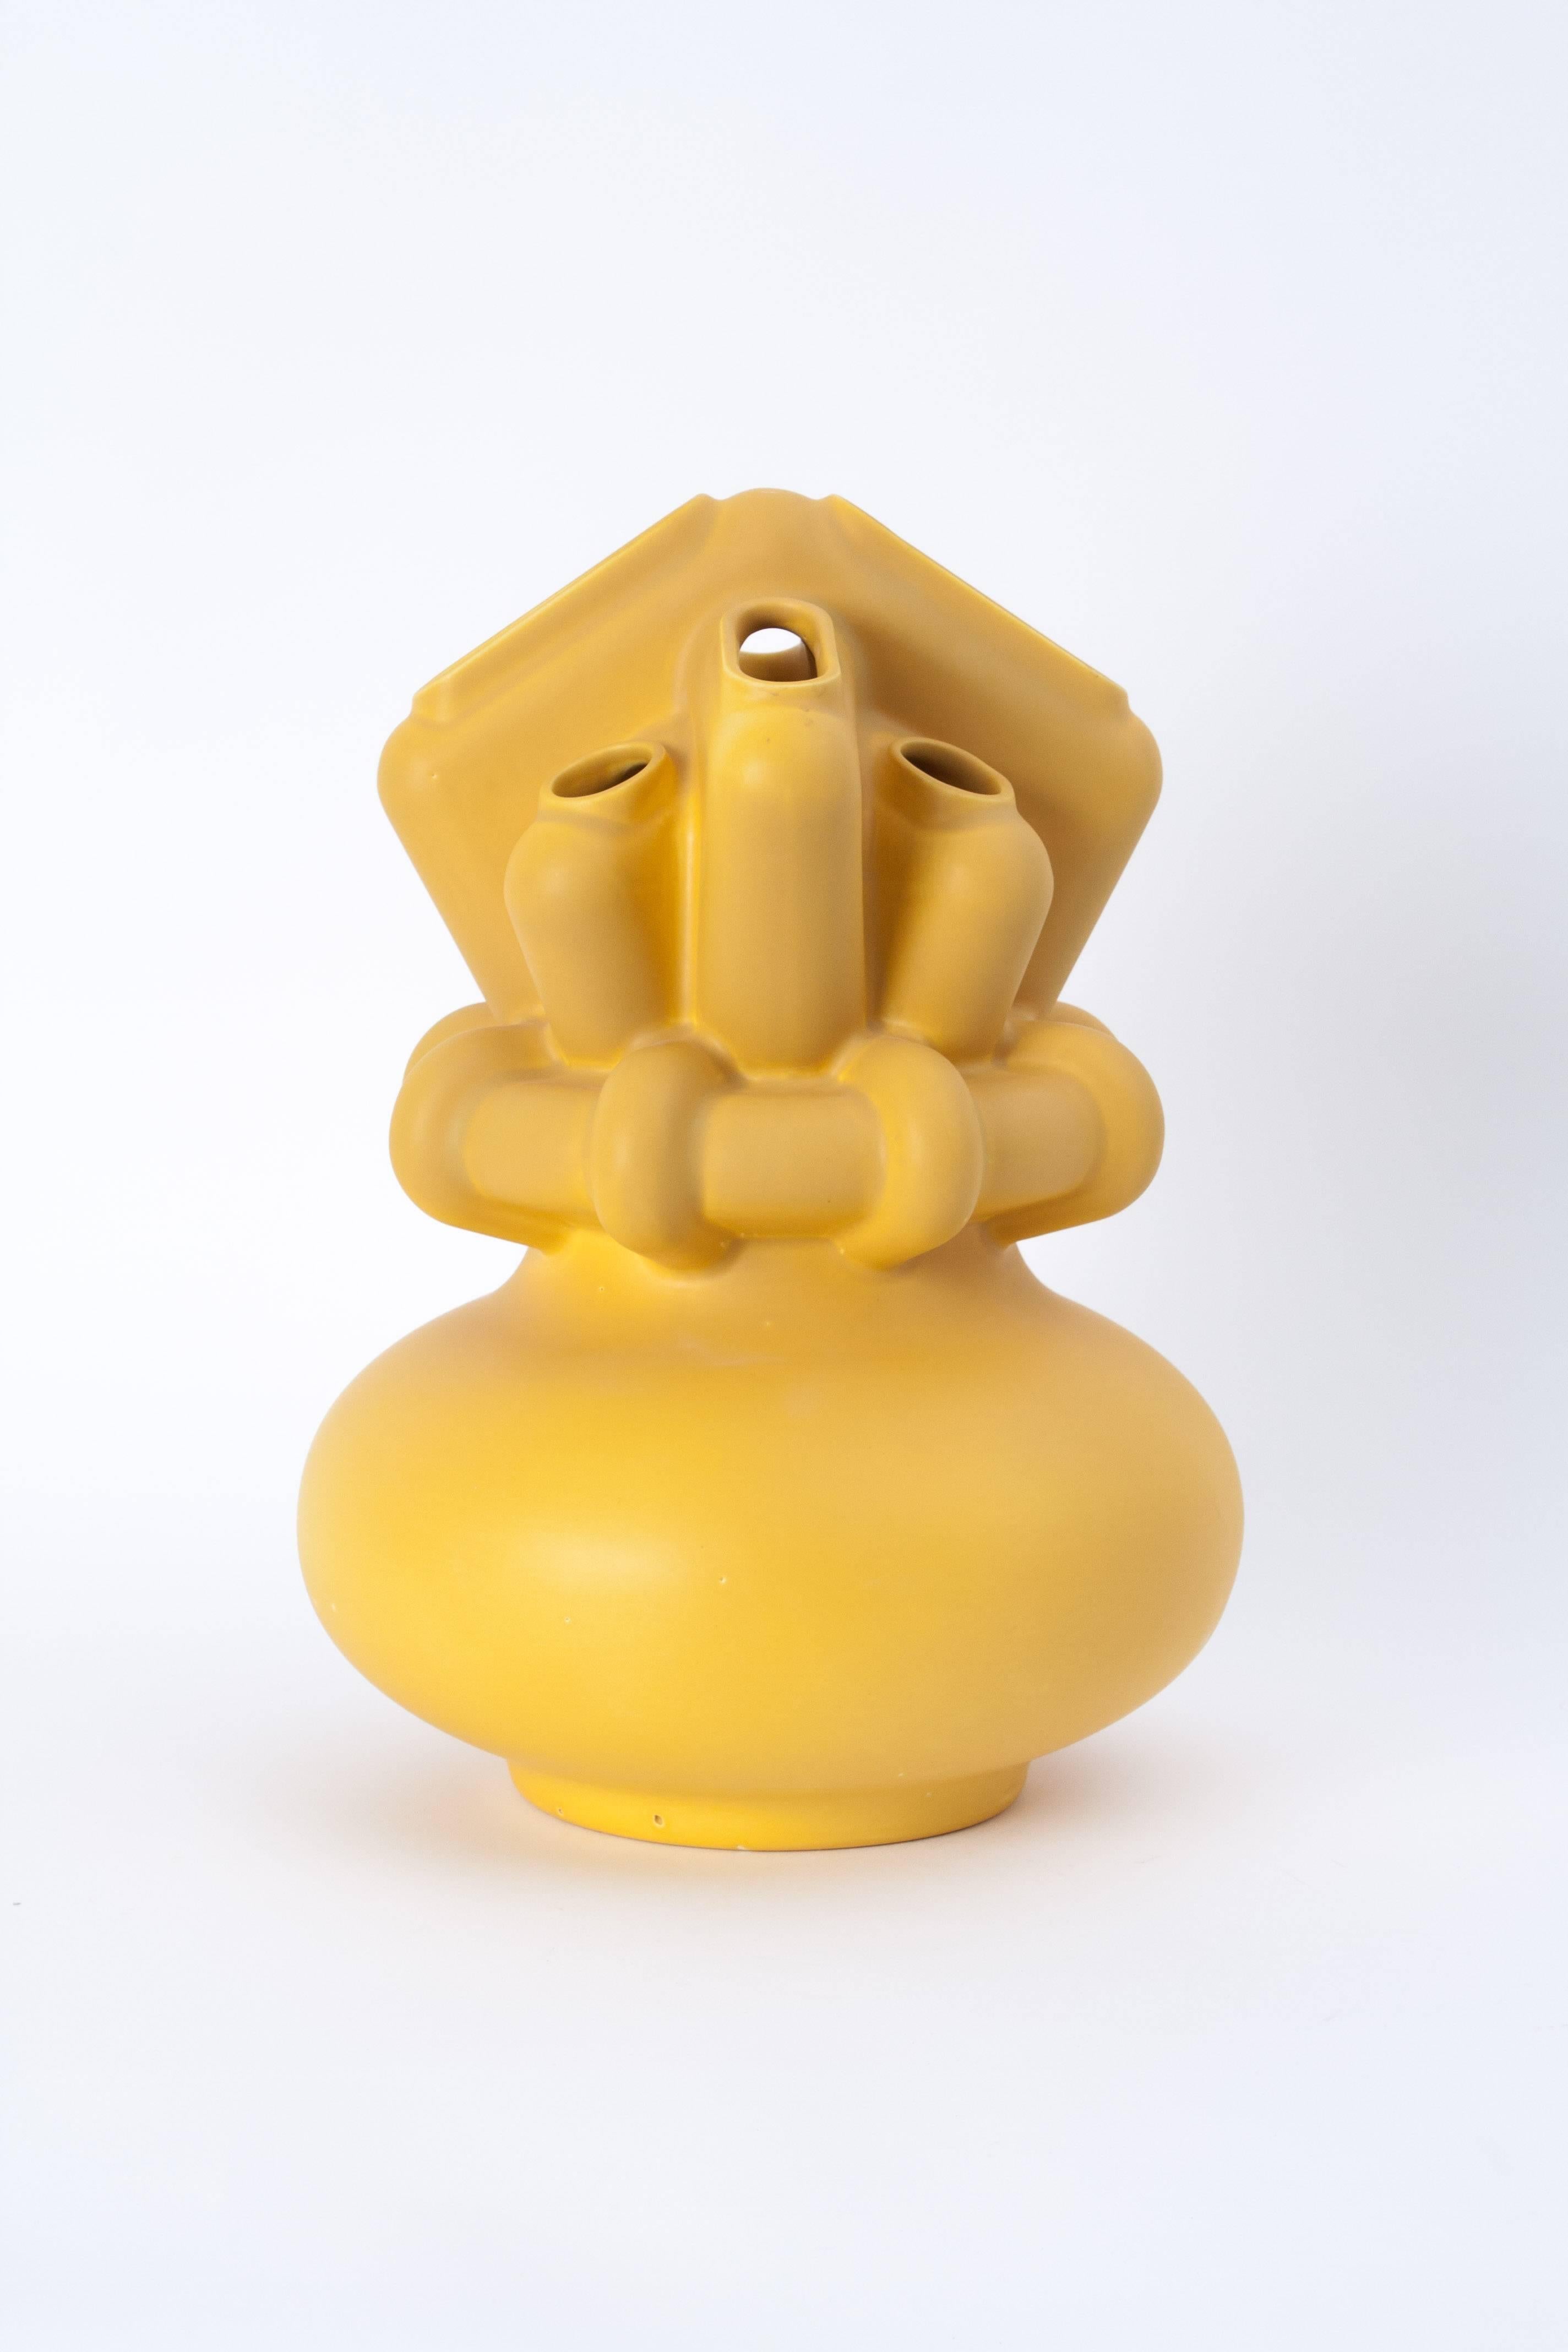 RODERICK VOS for COR UNUM . Vase sunflower coloured designed by Dutch designer Roderick Vos. Manufactured by Cor Unum in a social company. This colour is unique. Prototype. One produced. The style is mechanic organic, robot sculpture. Prototype in